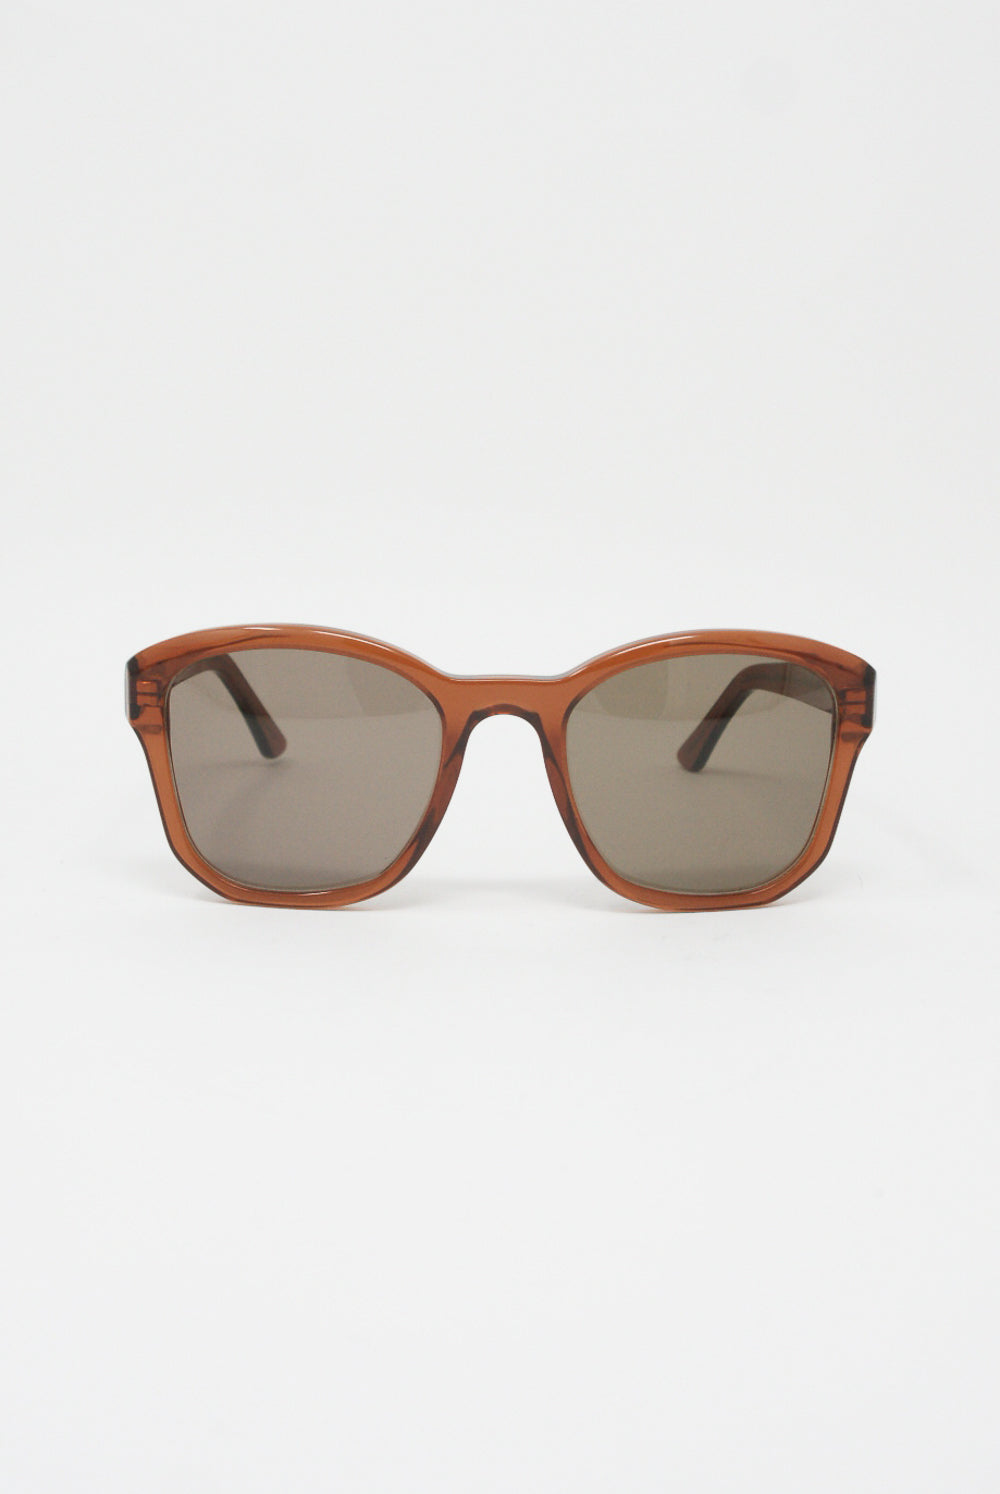 Handmade brown BQE Sunglasses in Judith by Eva Masaki, featuring a BQE frame, crafted from premium cellulose acetate material, beautifully showcased on a pristine white background.